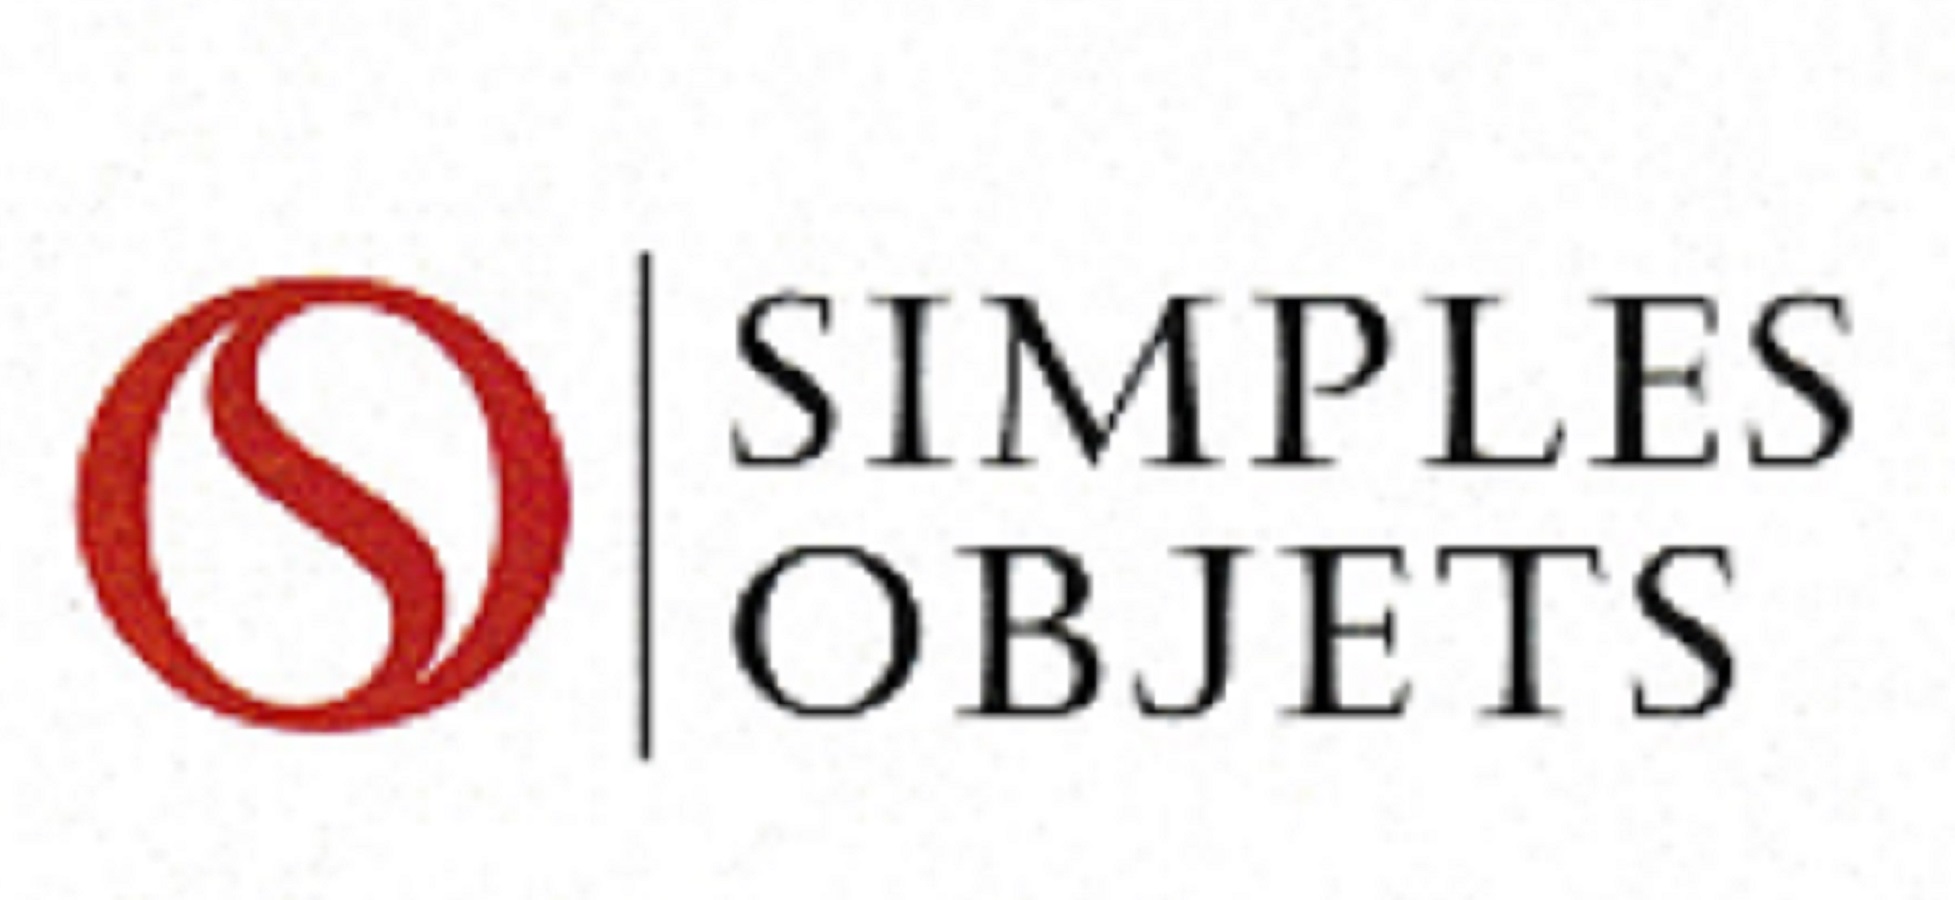 SIMPLES OBJETS

